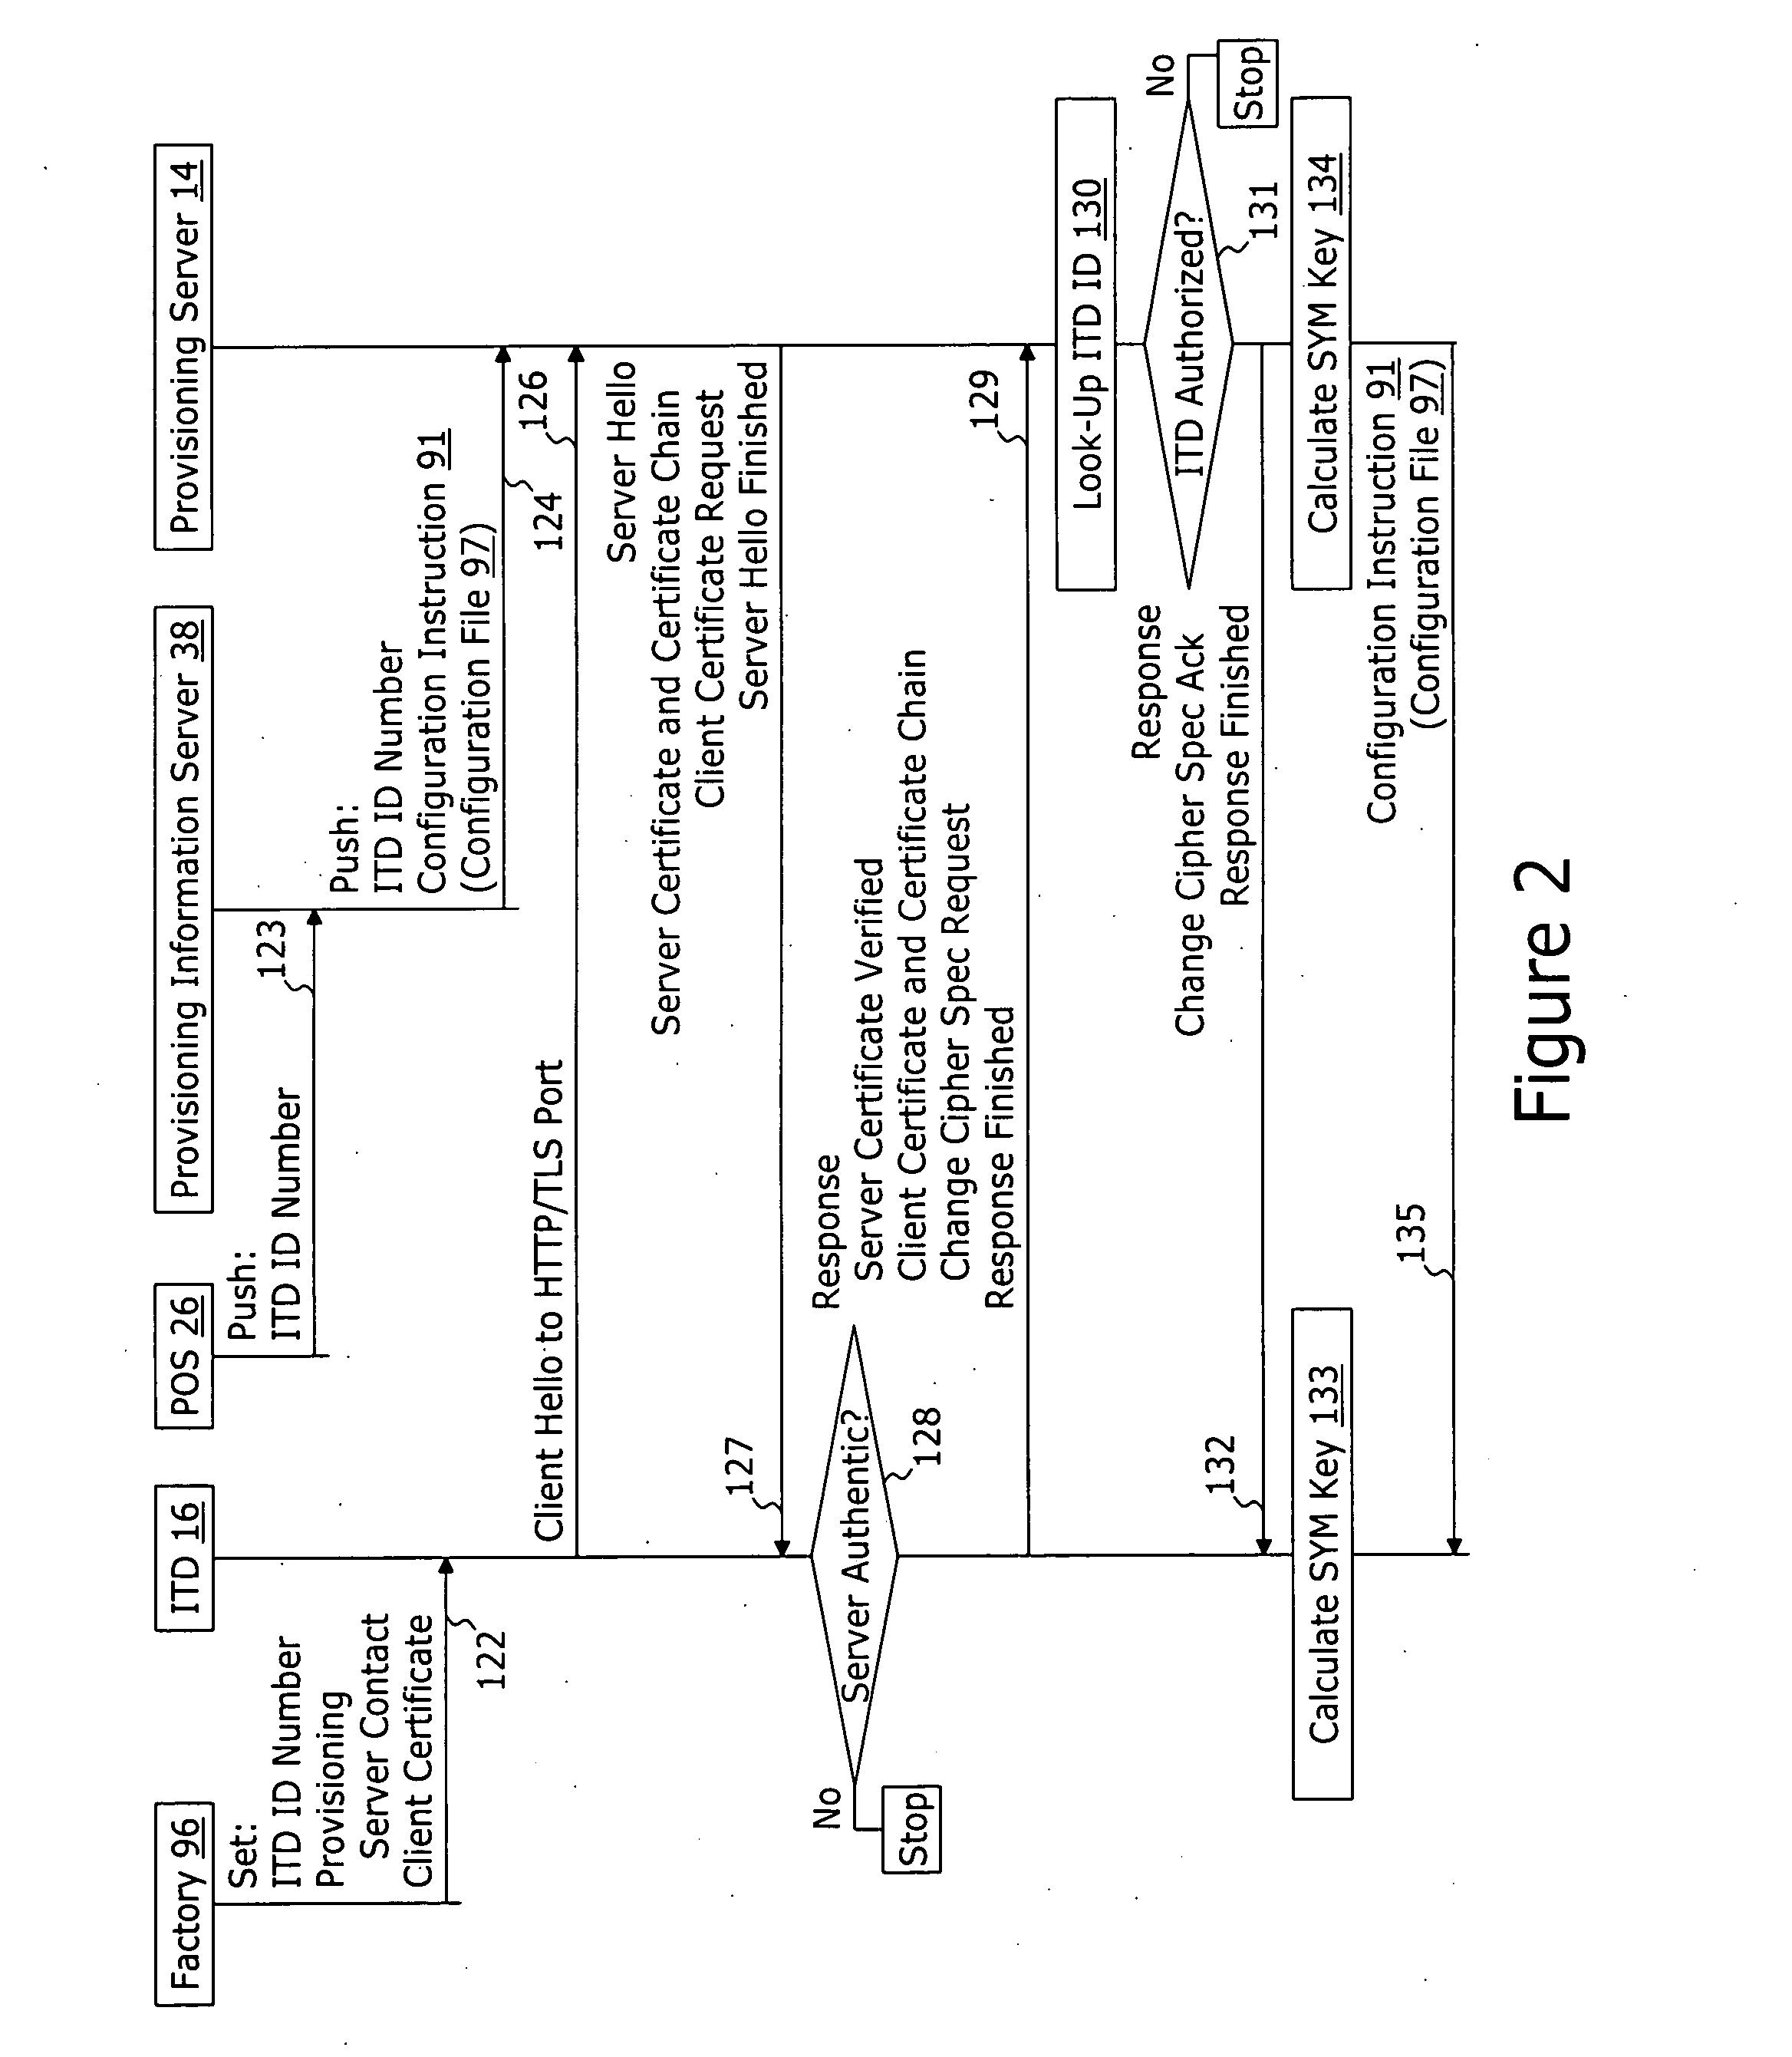 System and method for securely providing a configuration file over and open network